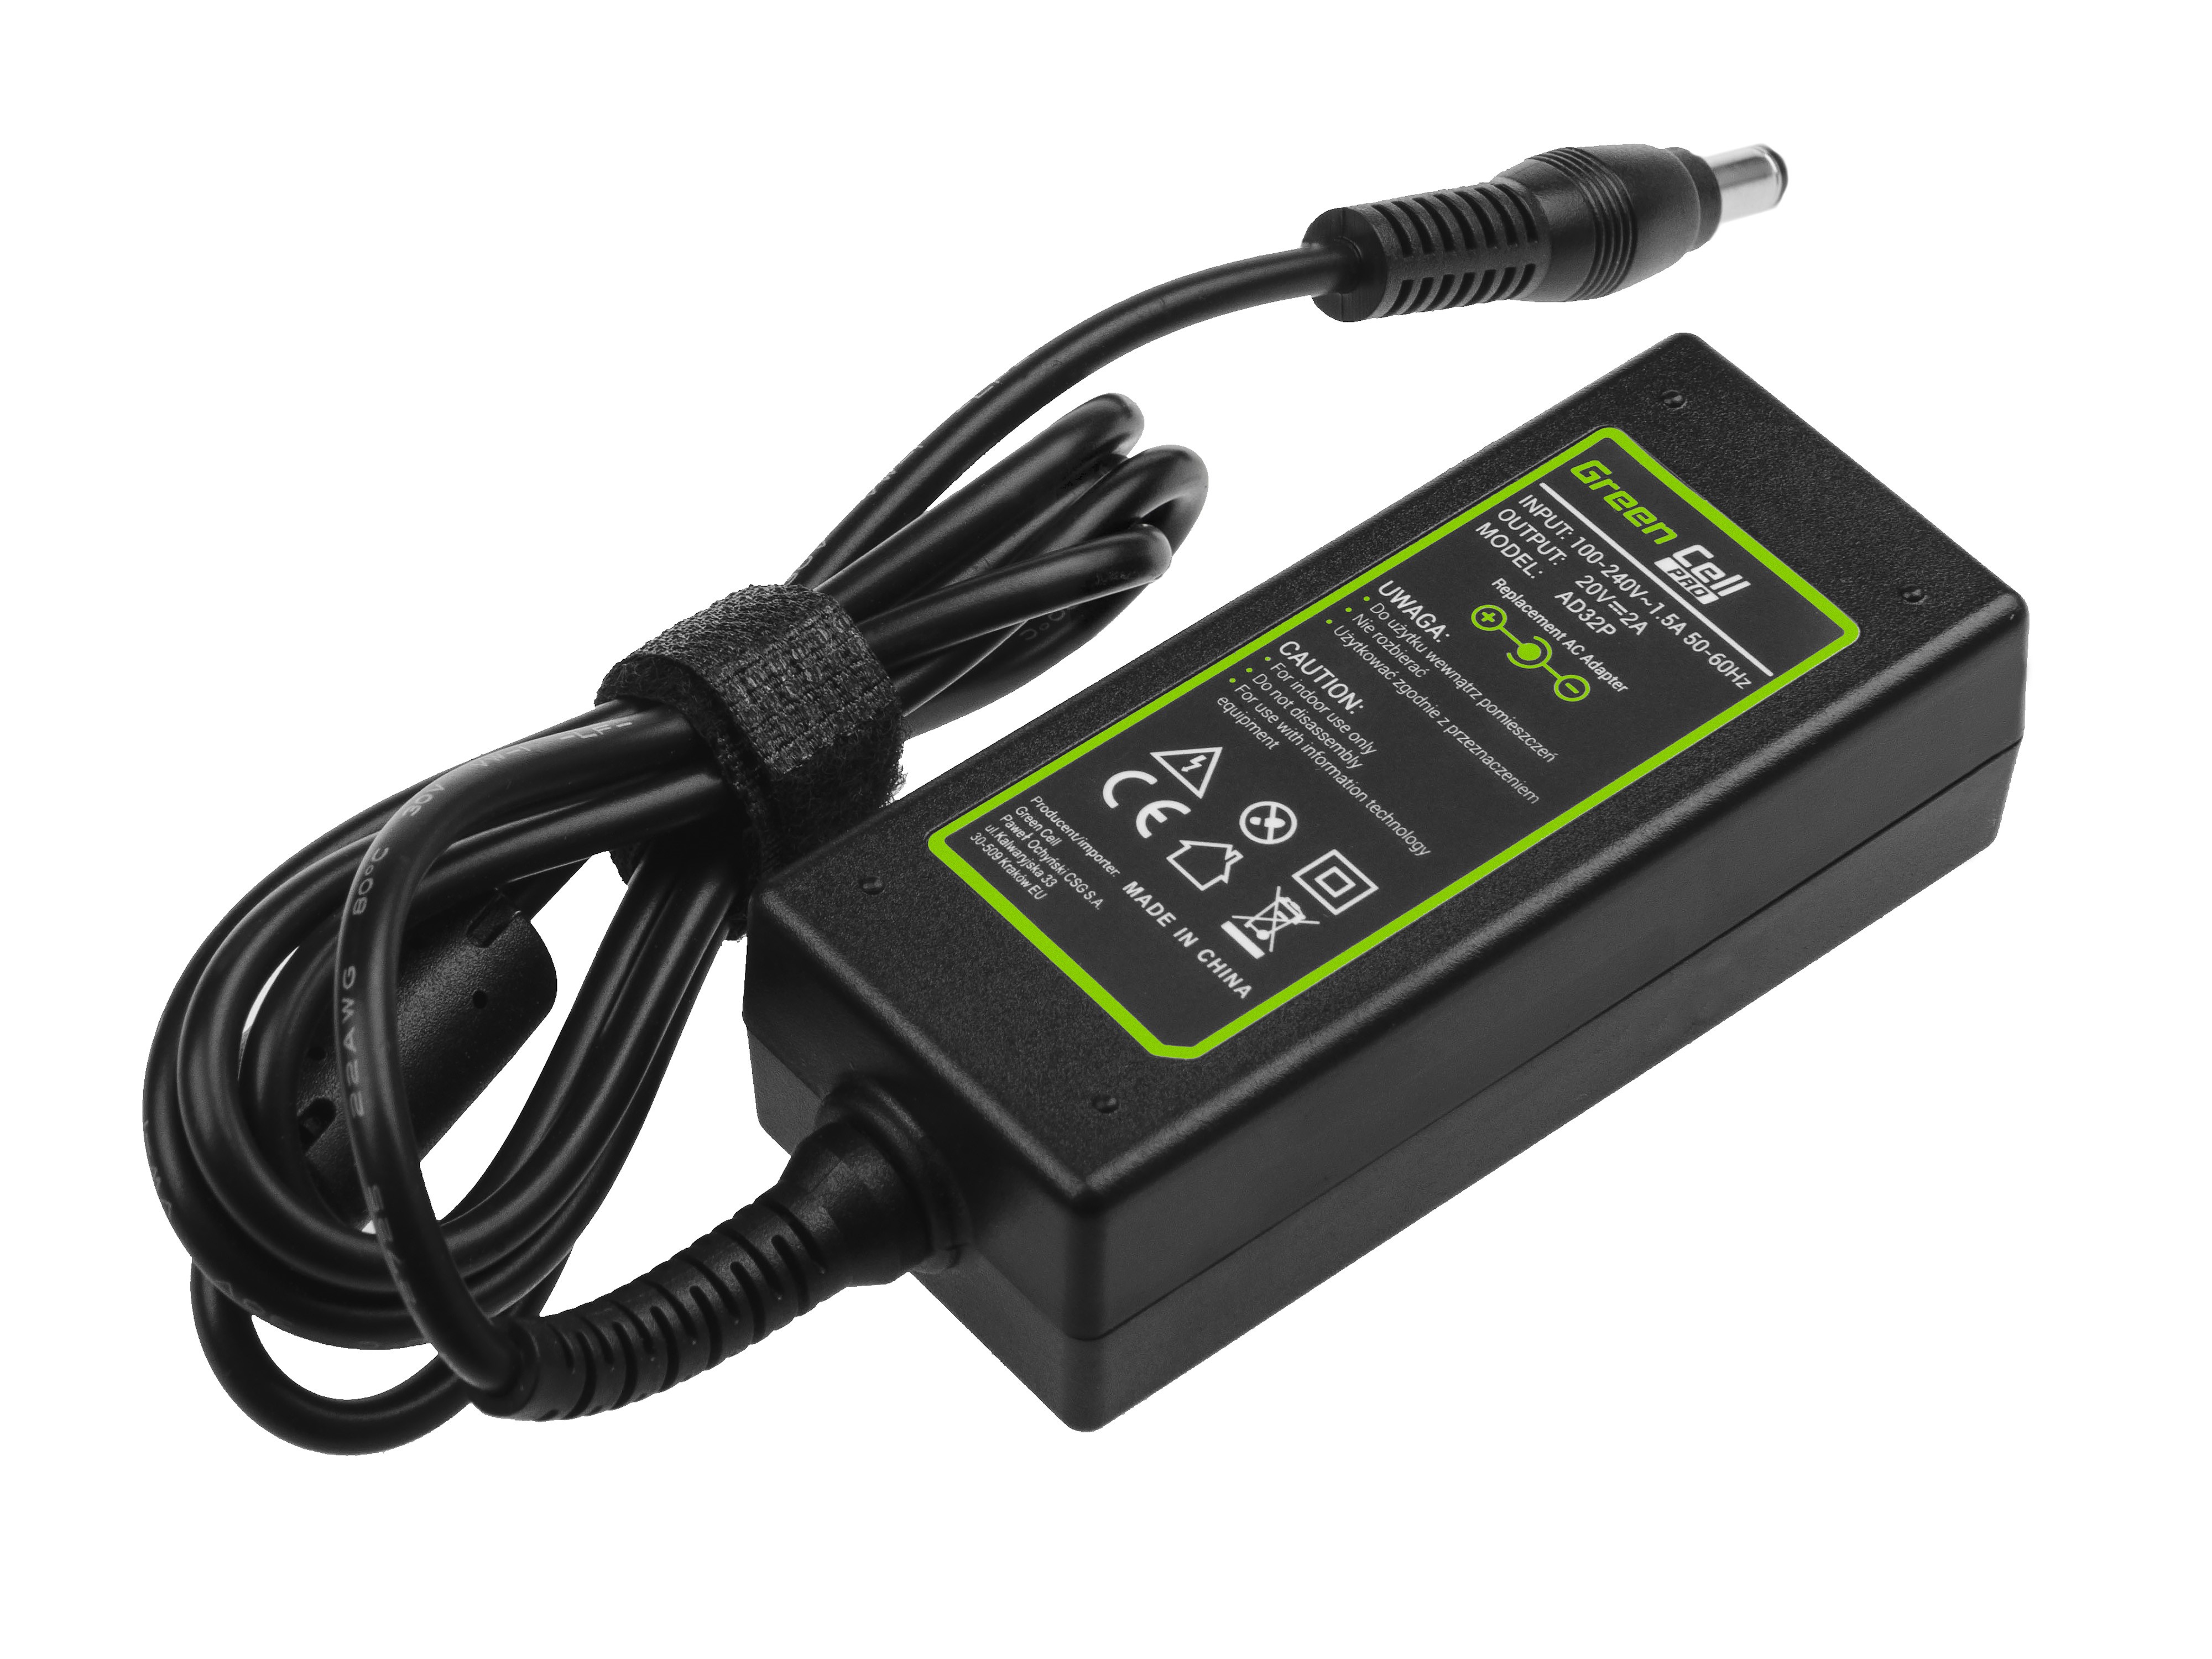 PRO Oplader  AC Adapter voor Lenovo IdeaPad N585 S10 S10-2 S10-3 S10e S100 S200 S300 S400 S405 U310 20V 2A 40W